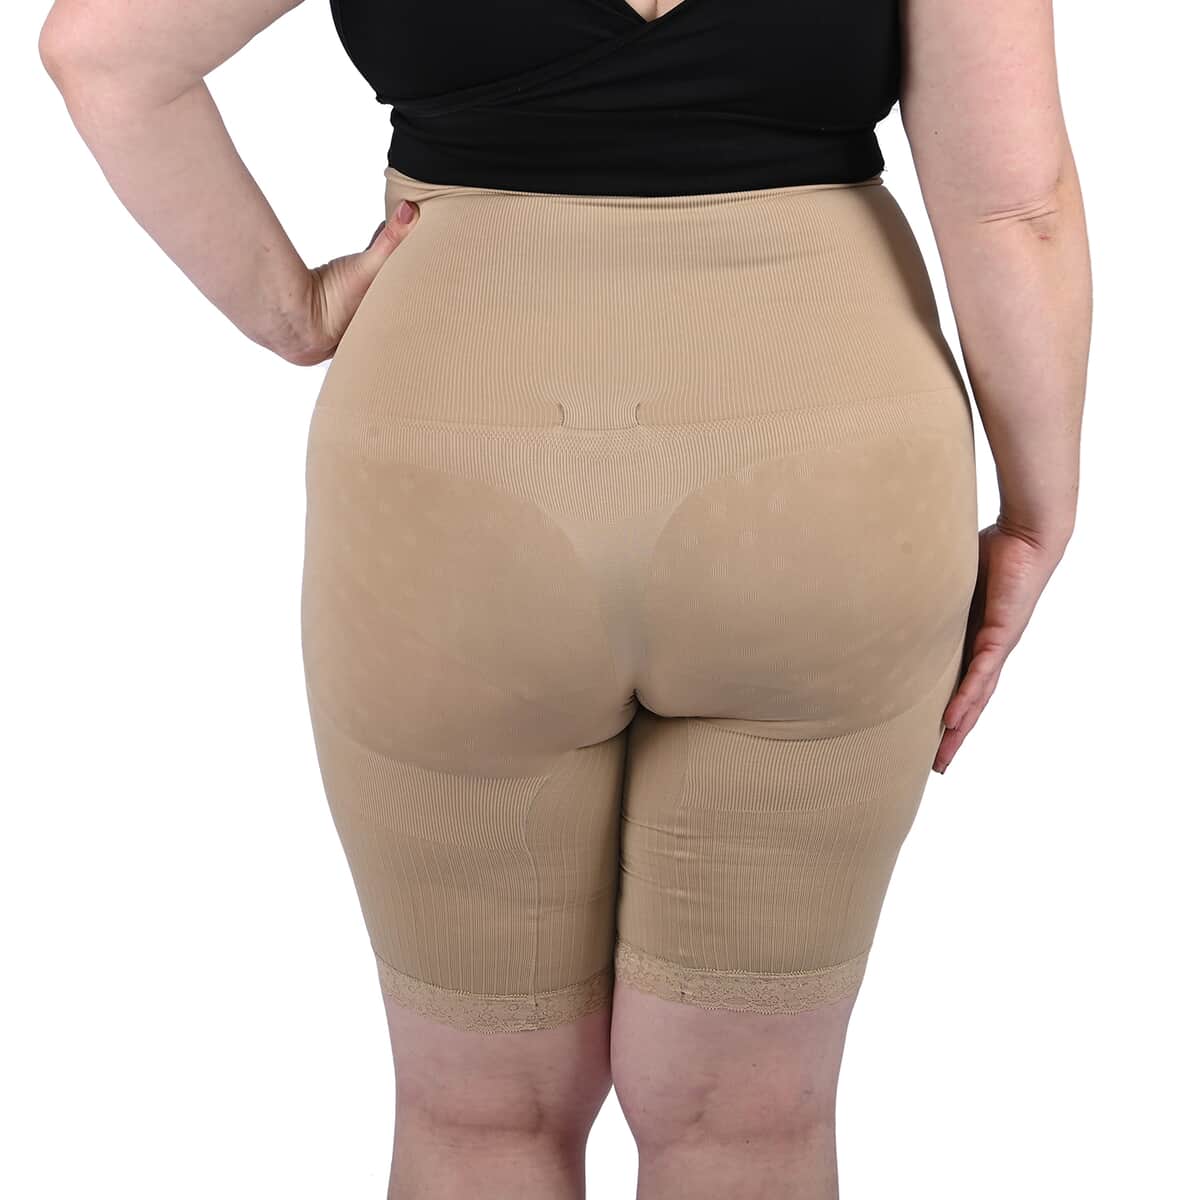 SANKOM Patent Classic Shapers with Lace - XXXL/Tan and White image number 1